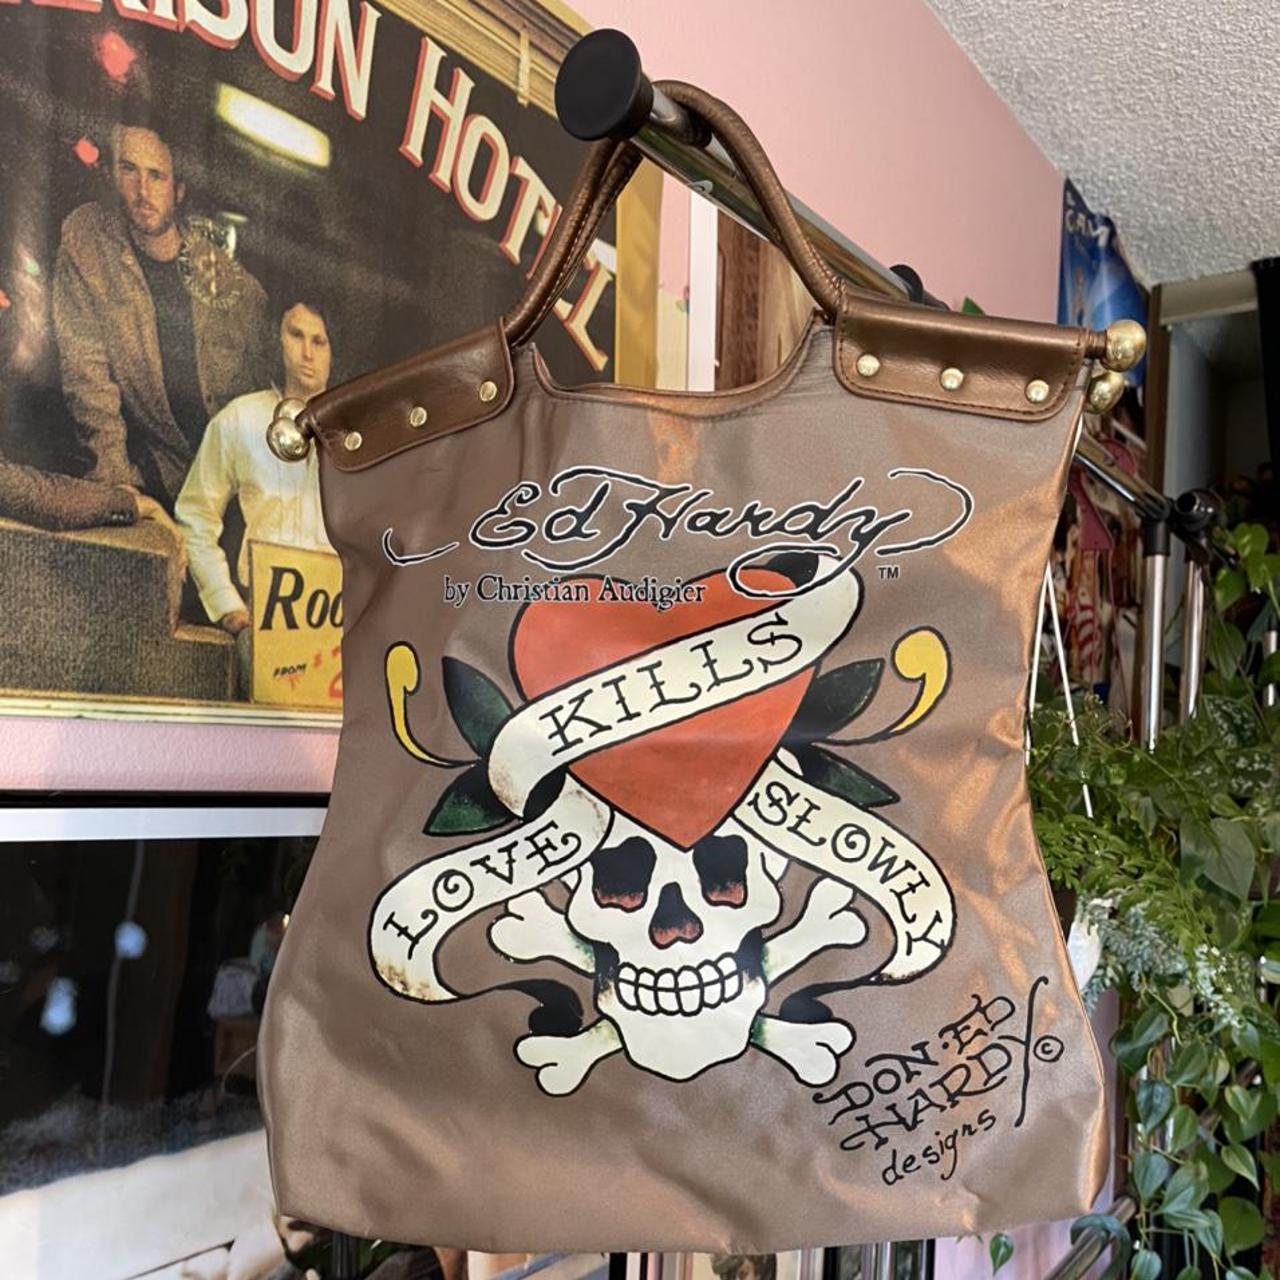 How can I style this Ed Hardy purse? I'm at a loss : r/alternativefashion